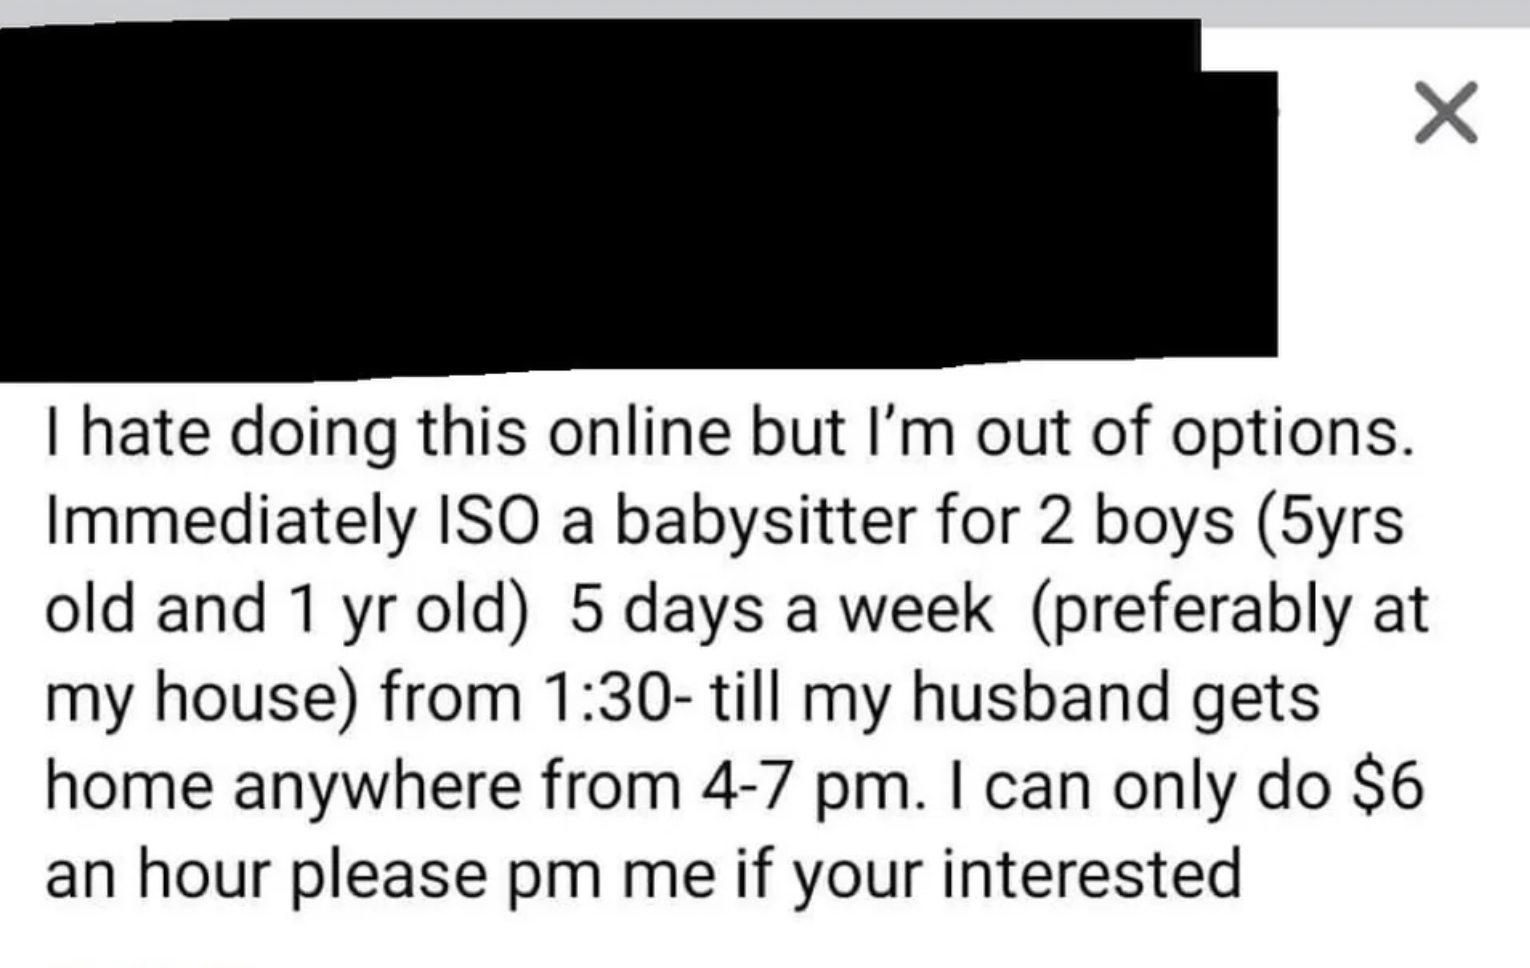 &quot;I can only do $6 an hour please pm me if your interested&quot;